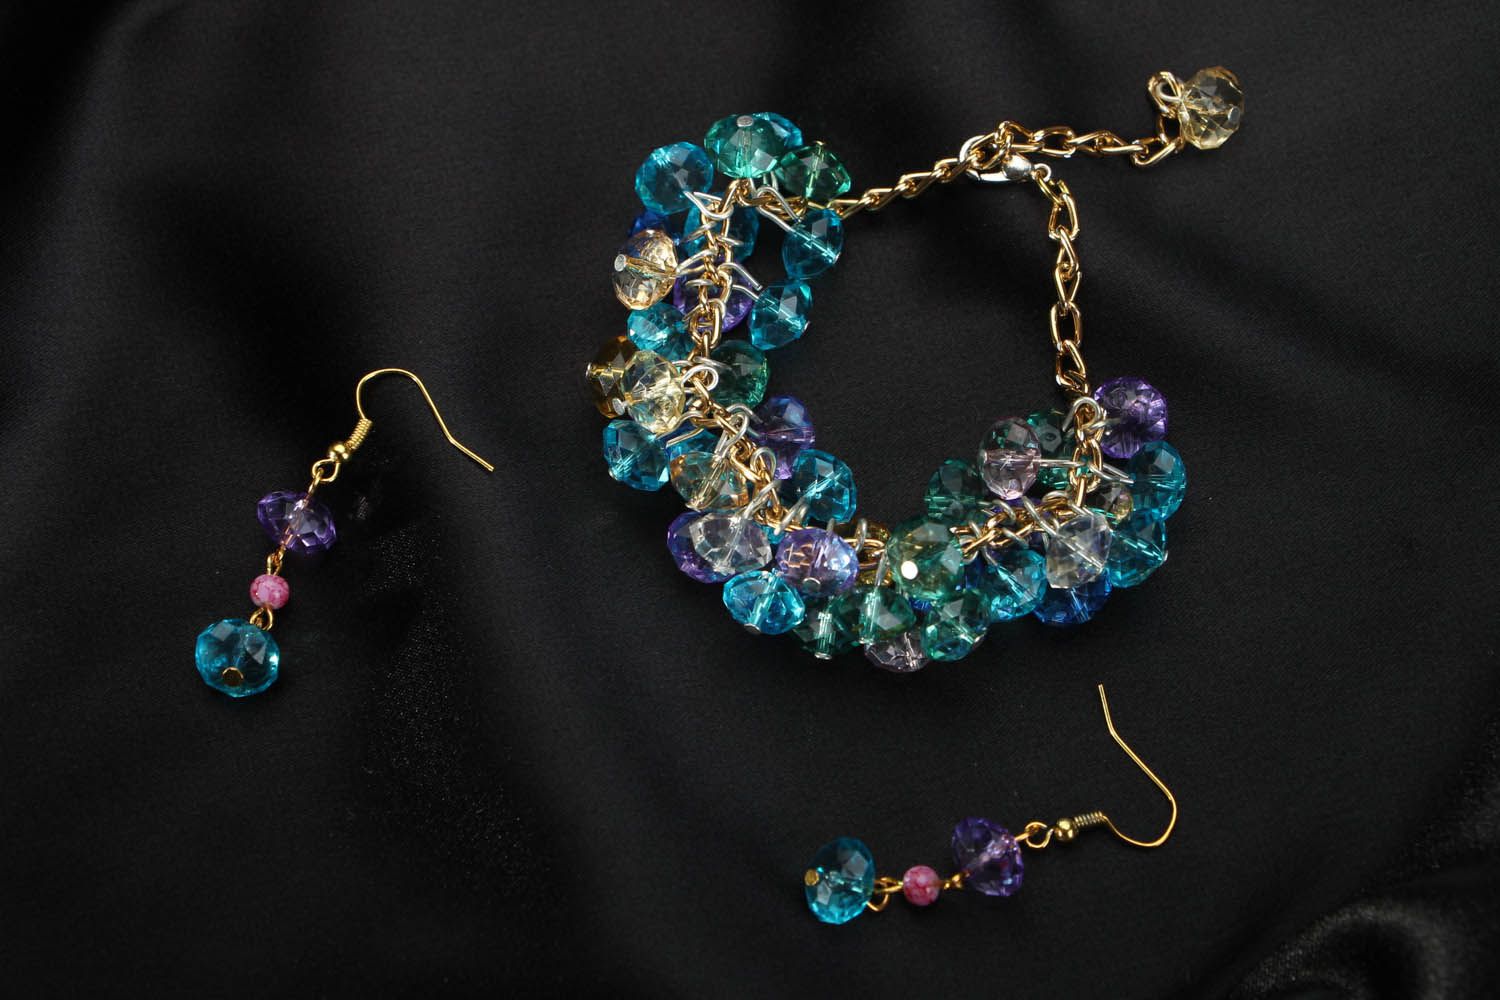 Bracelet and earrings made of transparent beads photo 1